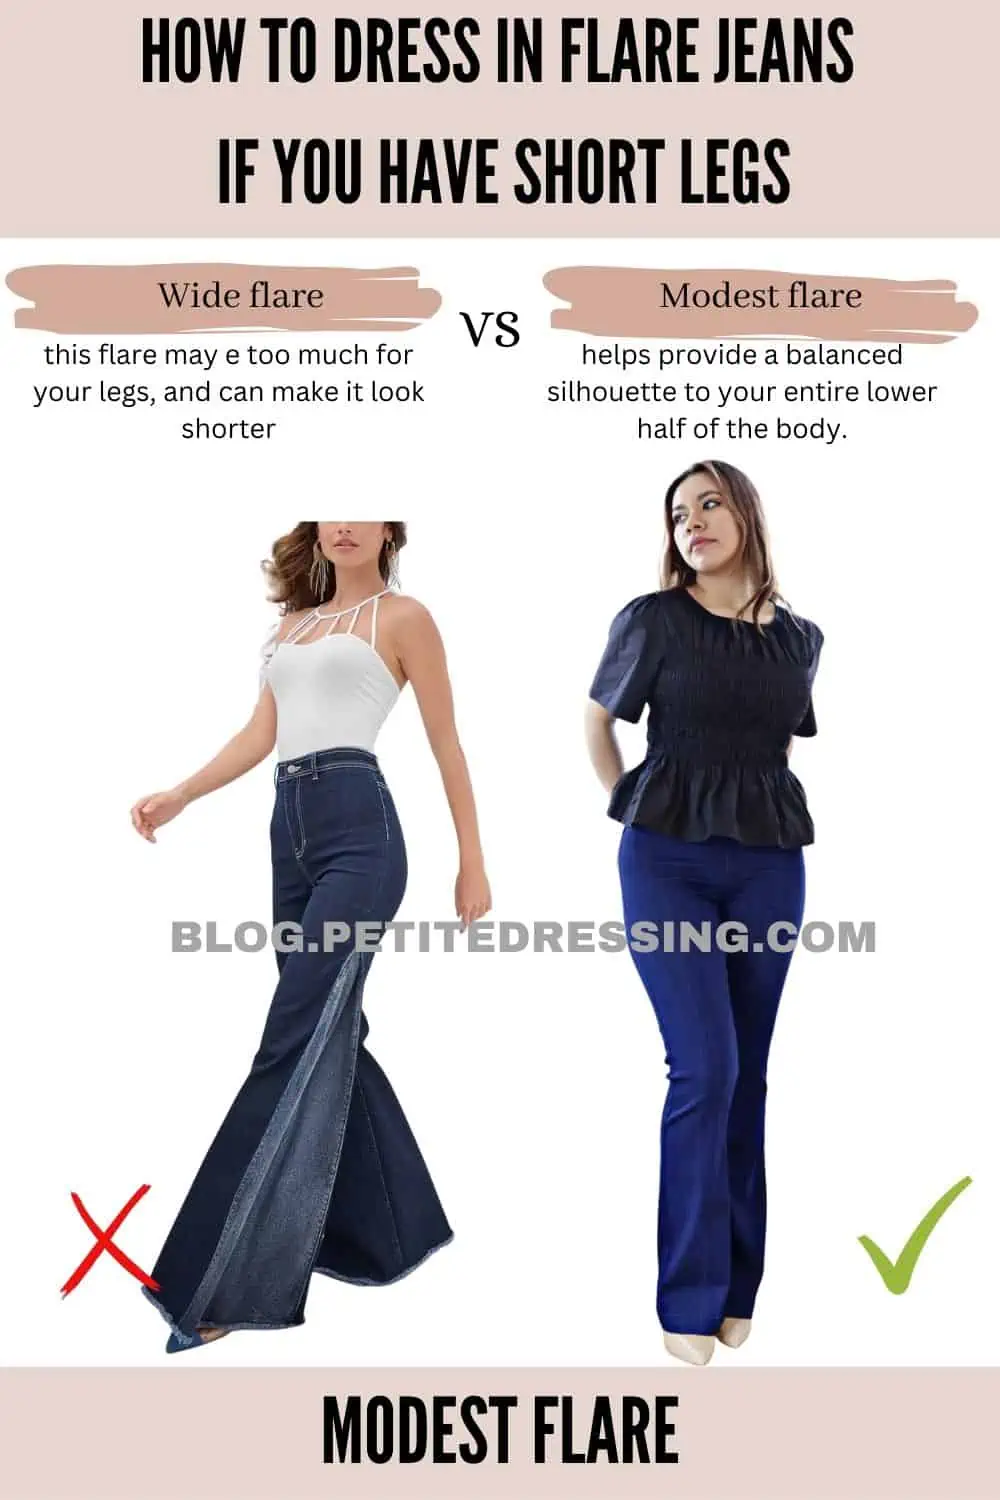 Are flared jeans good for people with short legs? - Quora